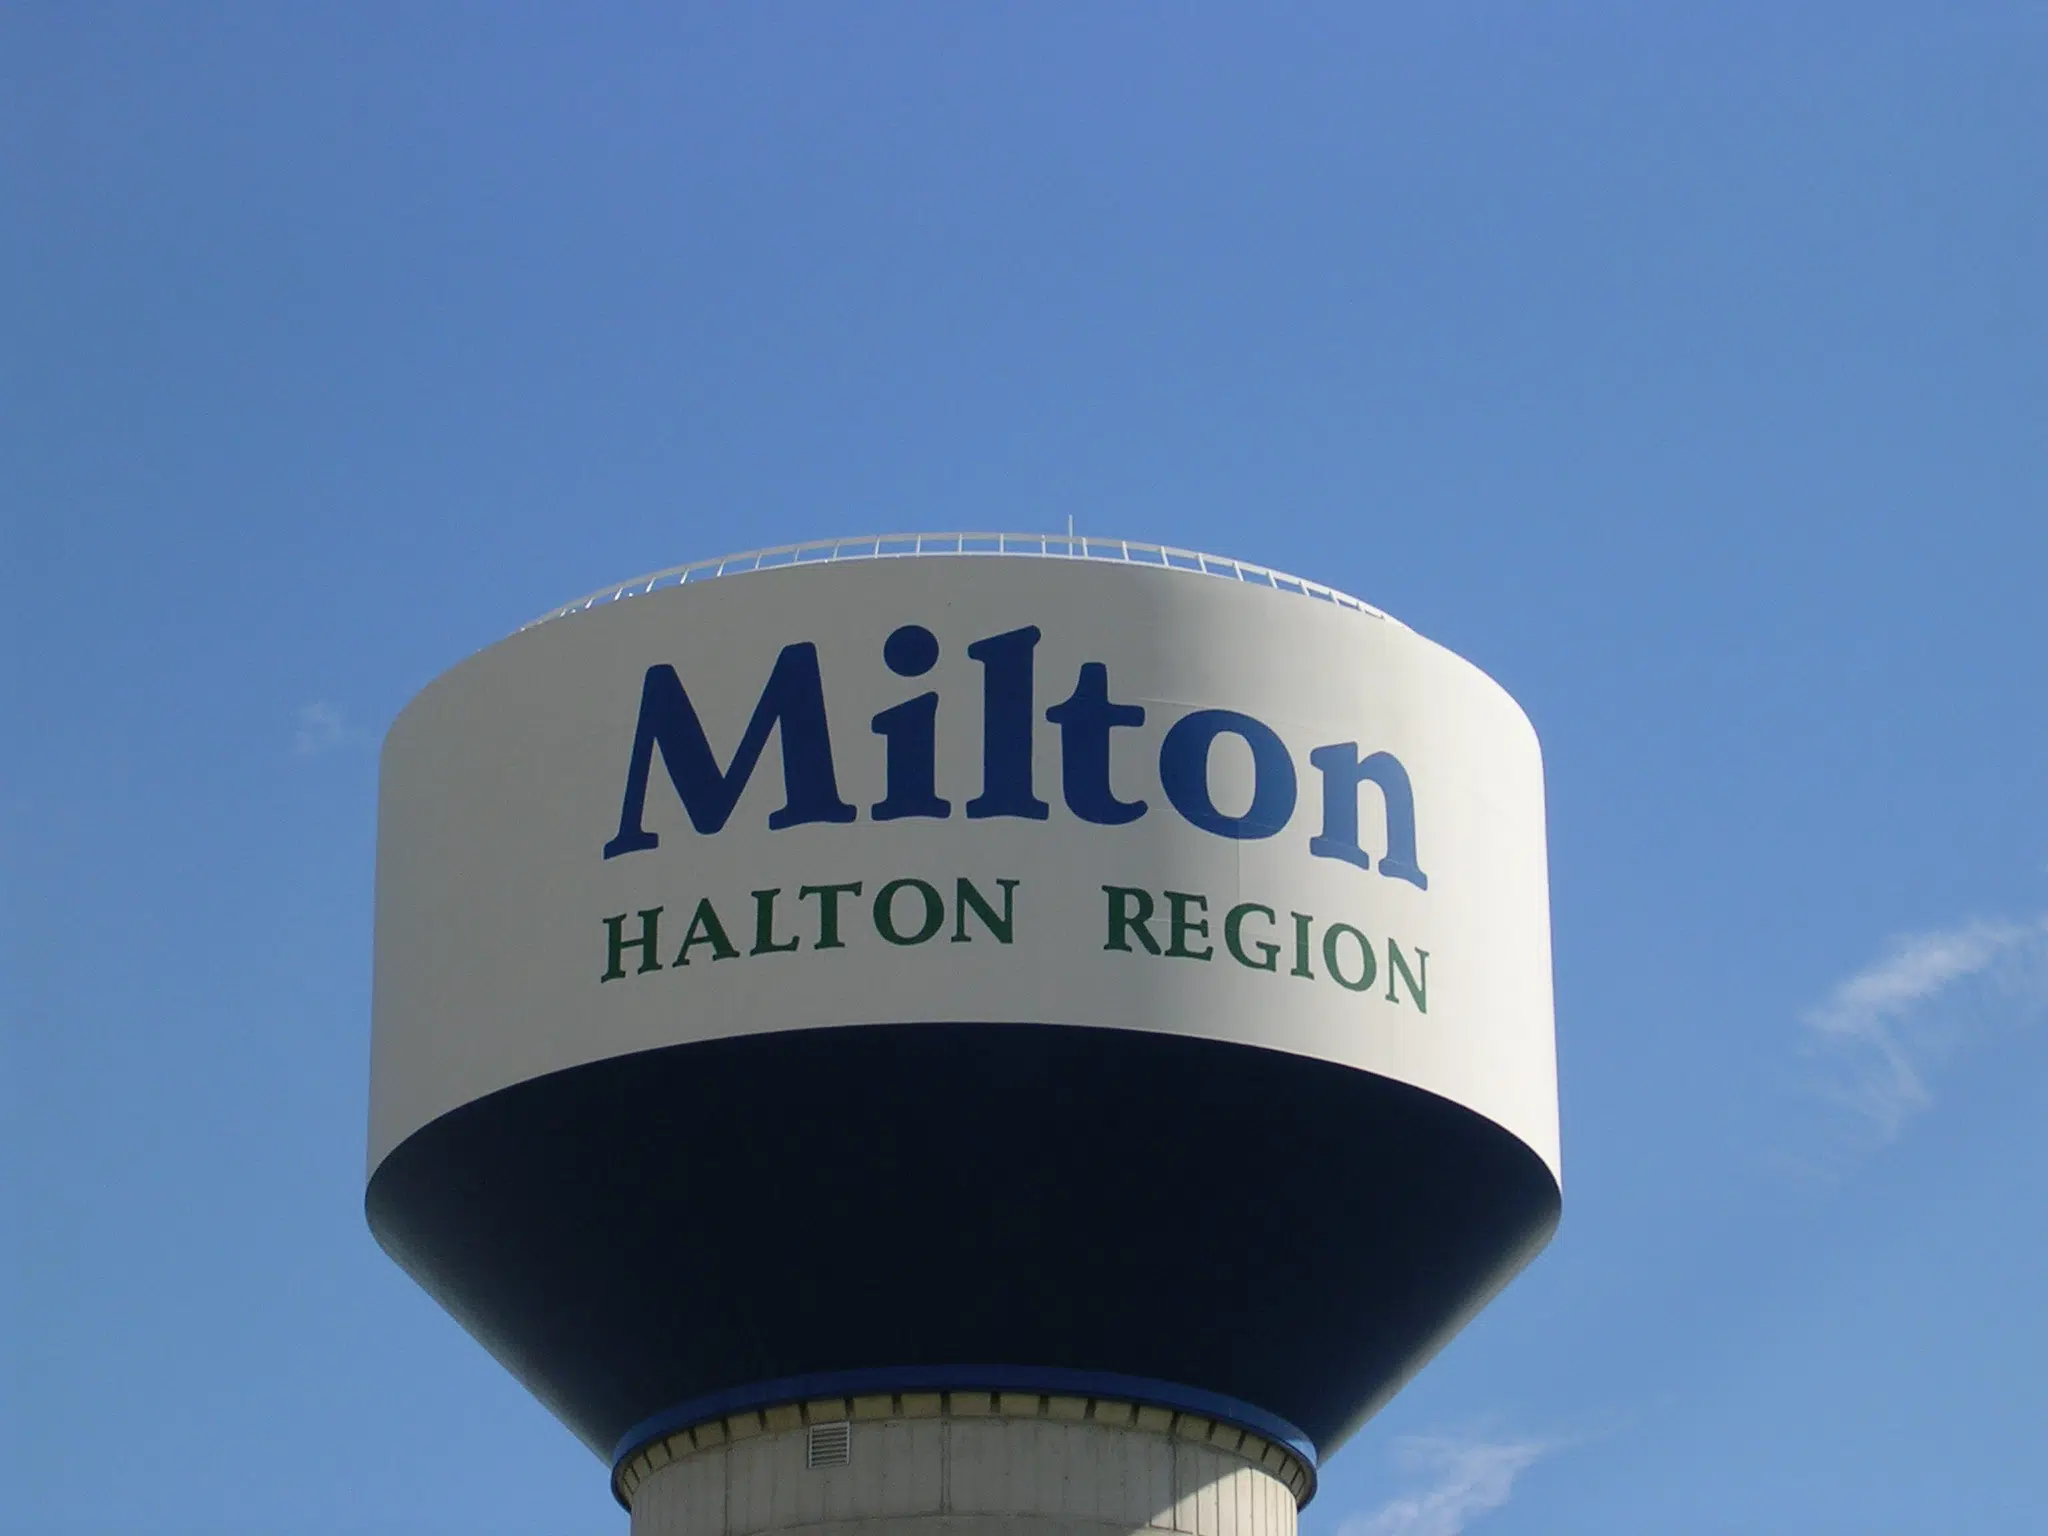 Milton is ranked as one of the happiest places in Canada